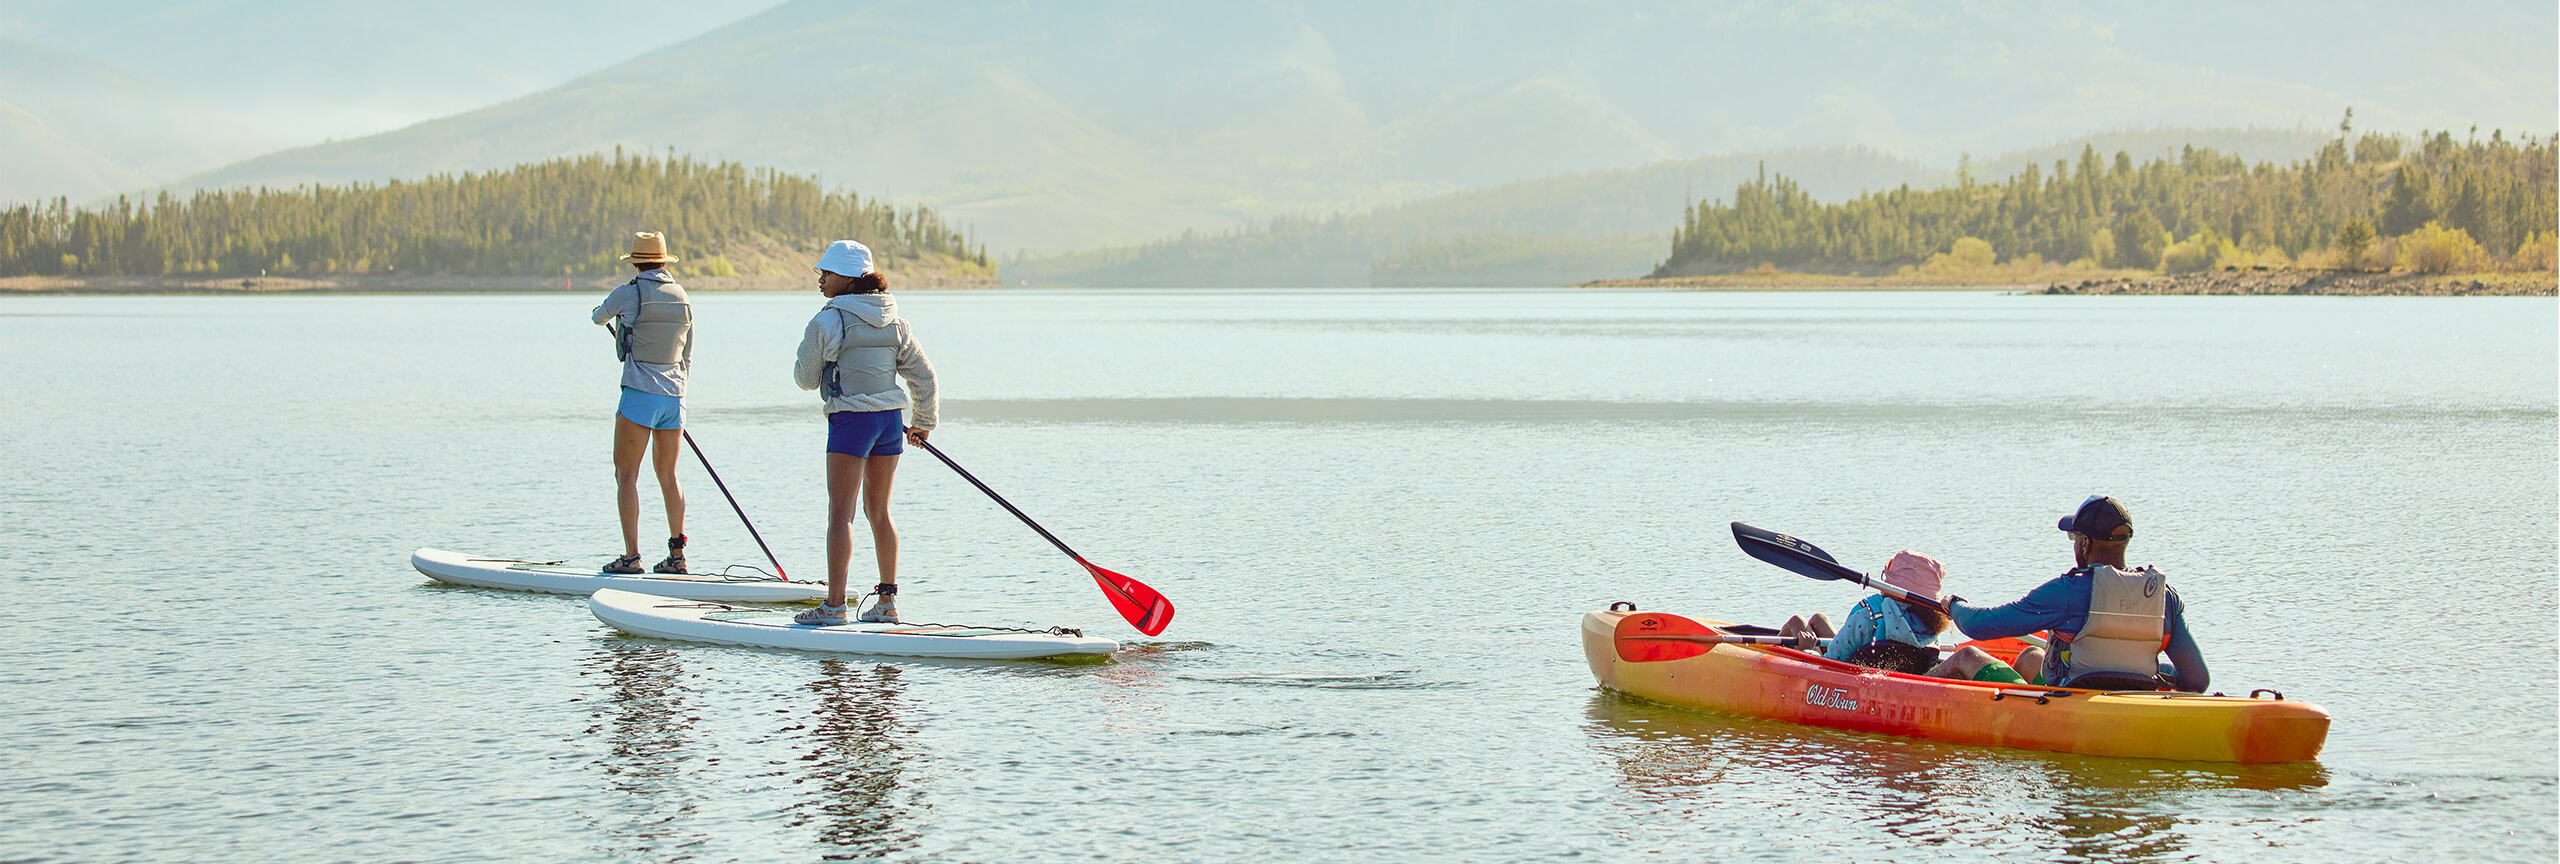 Stand up paddle boarders and people in kayak on Dillon Reservoir